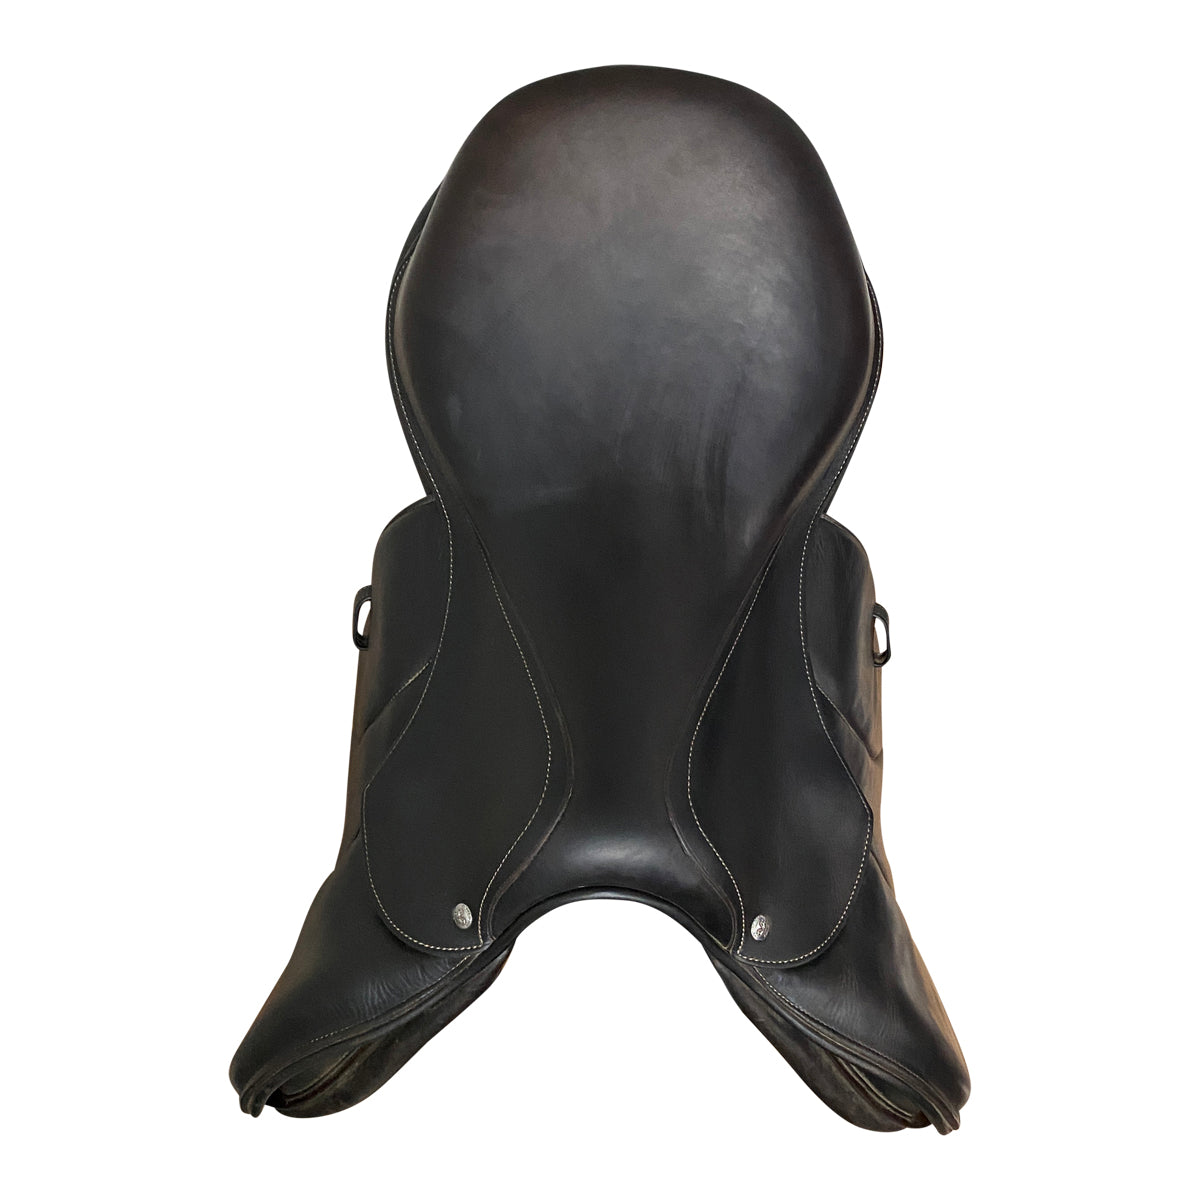 Voltaire 2018 Palm Beach Saddle in Brown